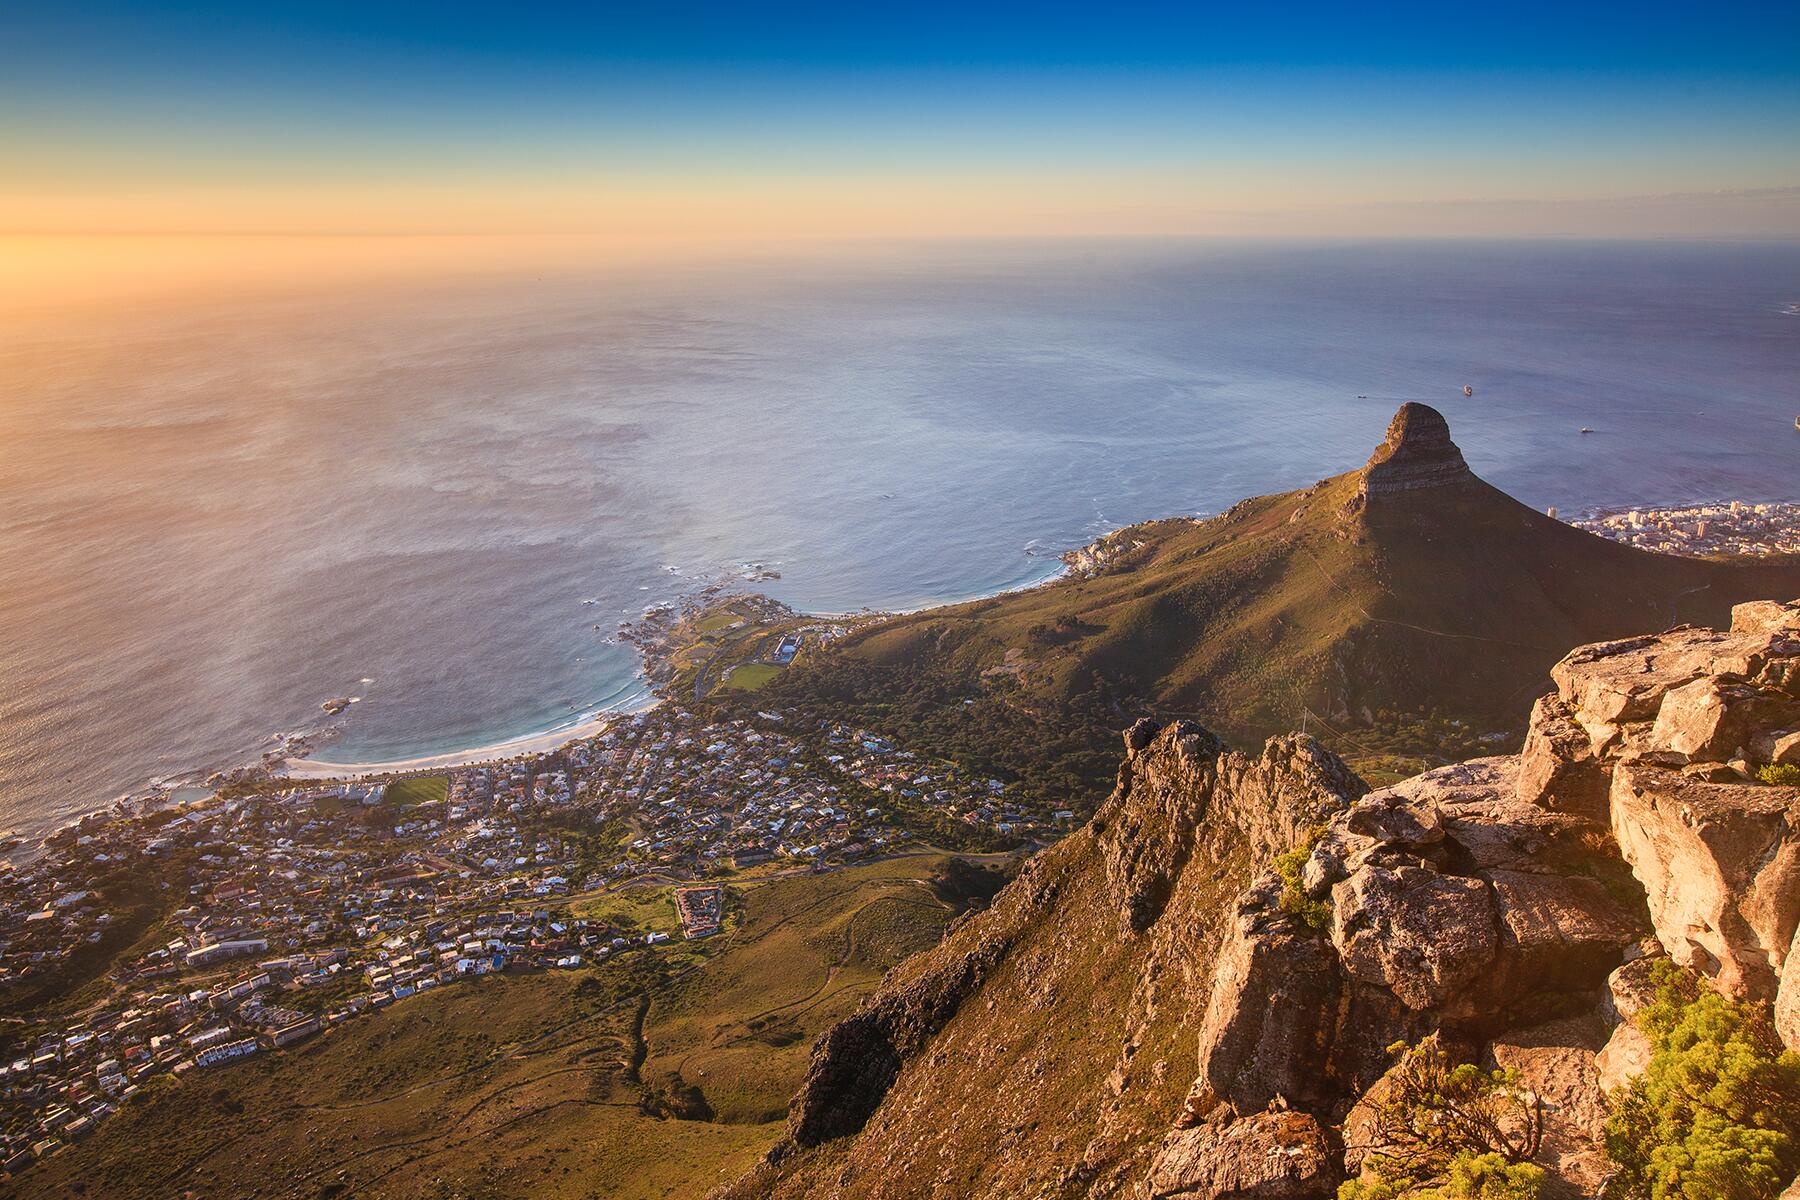 <a href='https://www.fodors.com/world/africa-and-middle-east/south-africa/cape-town-and-peninsula/experiences/news/photos/table-mountain-101-everything-you-need-to-know-about-visiting-cape-towns-iconic-landmark#'>From &quot;Table Mountain 101: Everything You Need to Know About Visiting Cape Town's Iconic Landmark: How Long Should I Stay?&quot;</a>